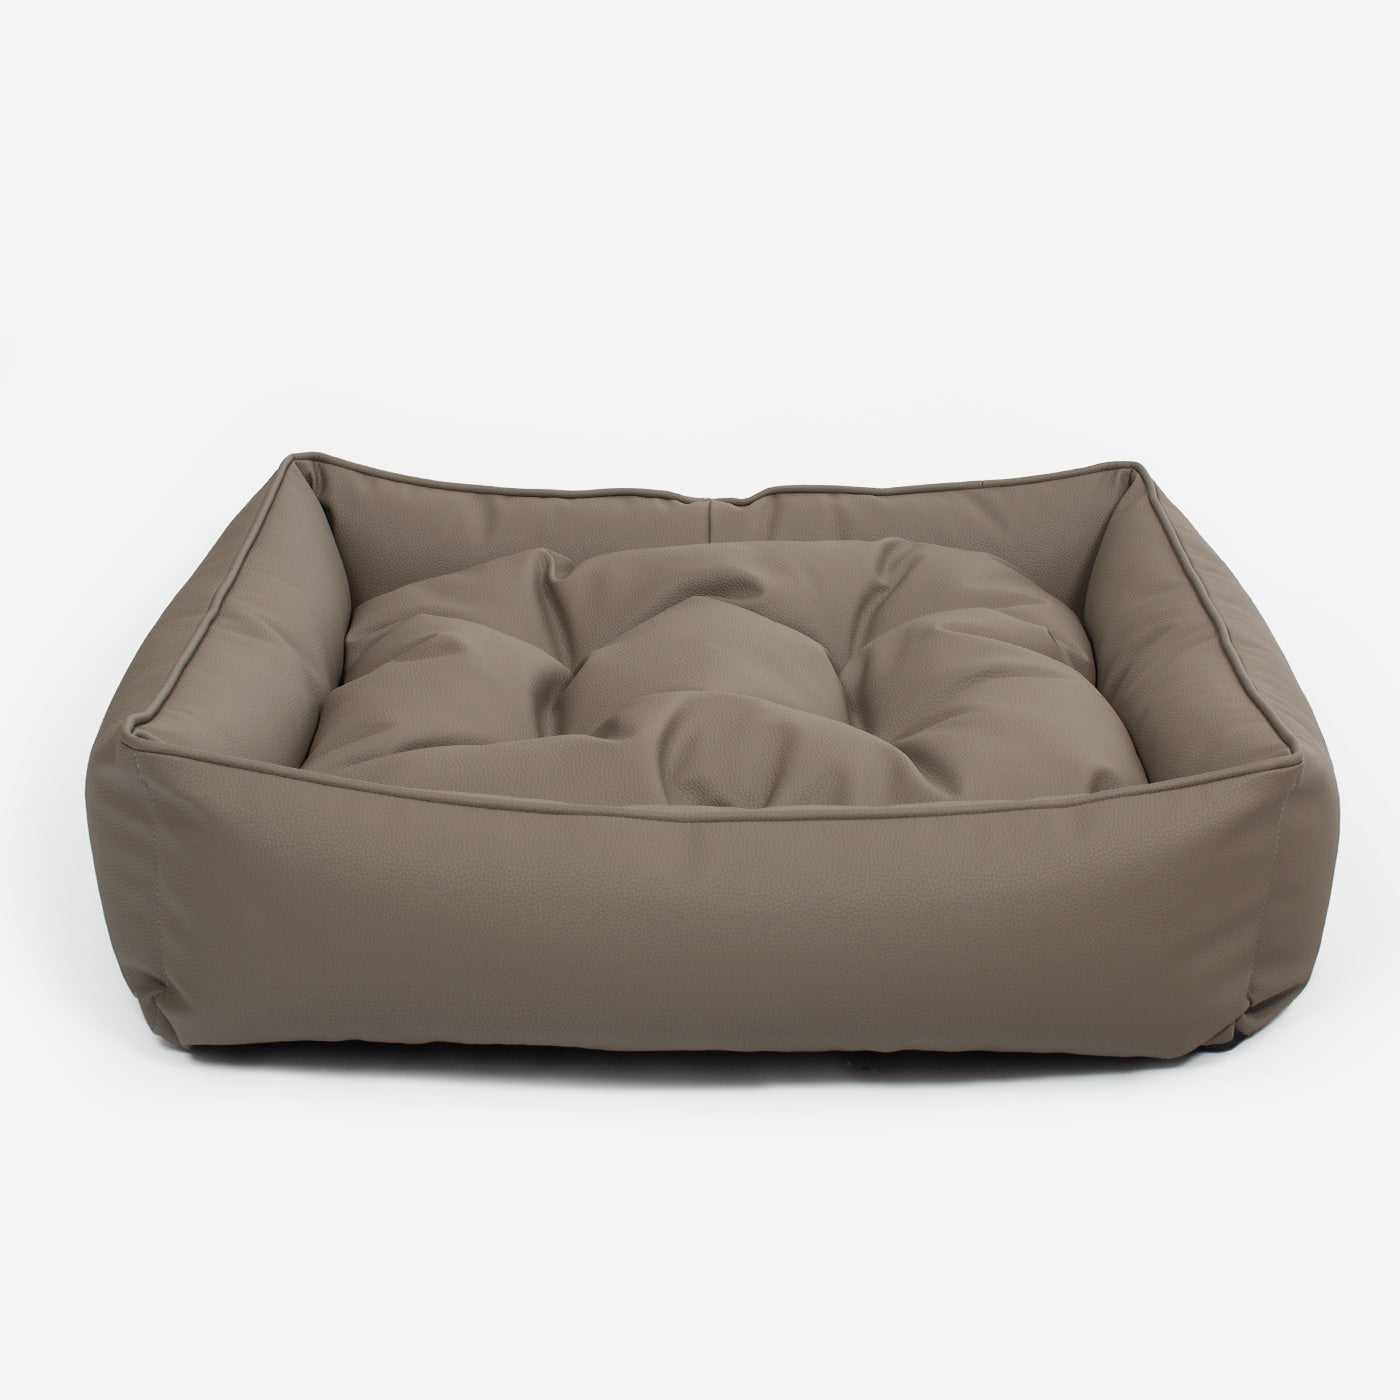 [color:camel] Luxury Handmade Box Bed in Rhino Tough Desert Faux Leather, in Camel, Perfect For Your Pets Nap Time! Available To Personalize at Lords & Labradors US